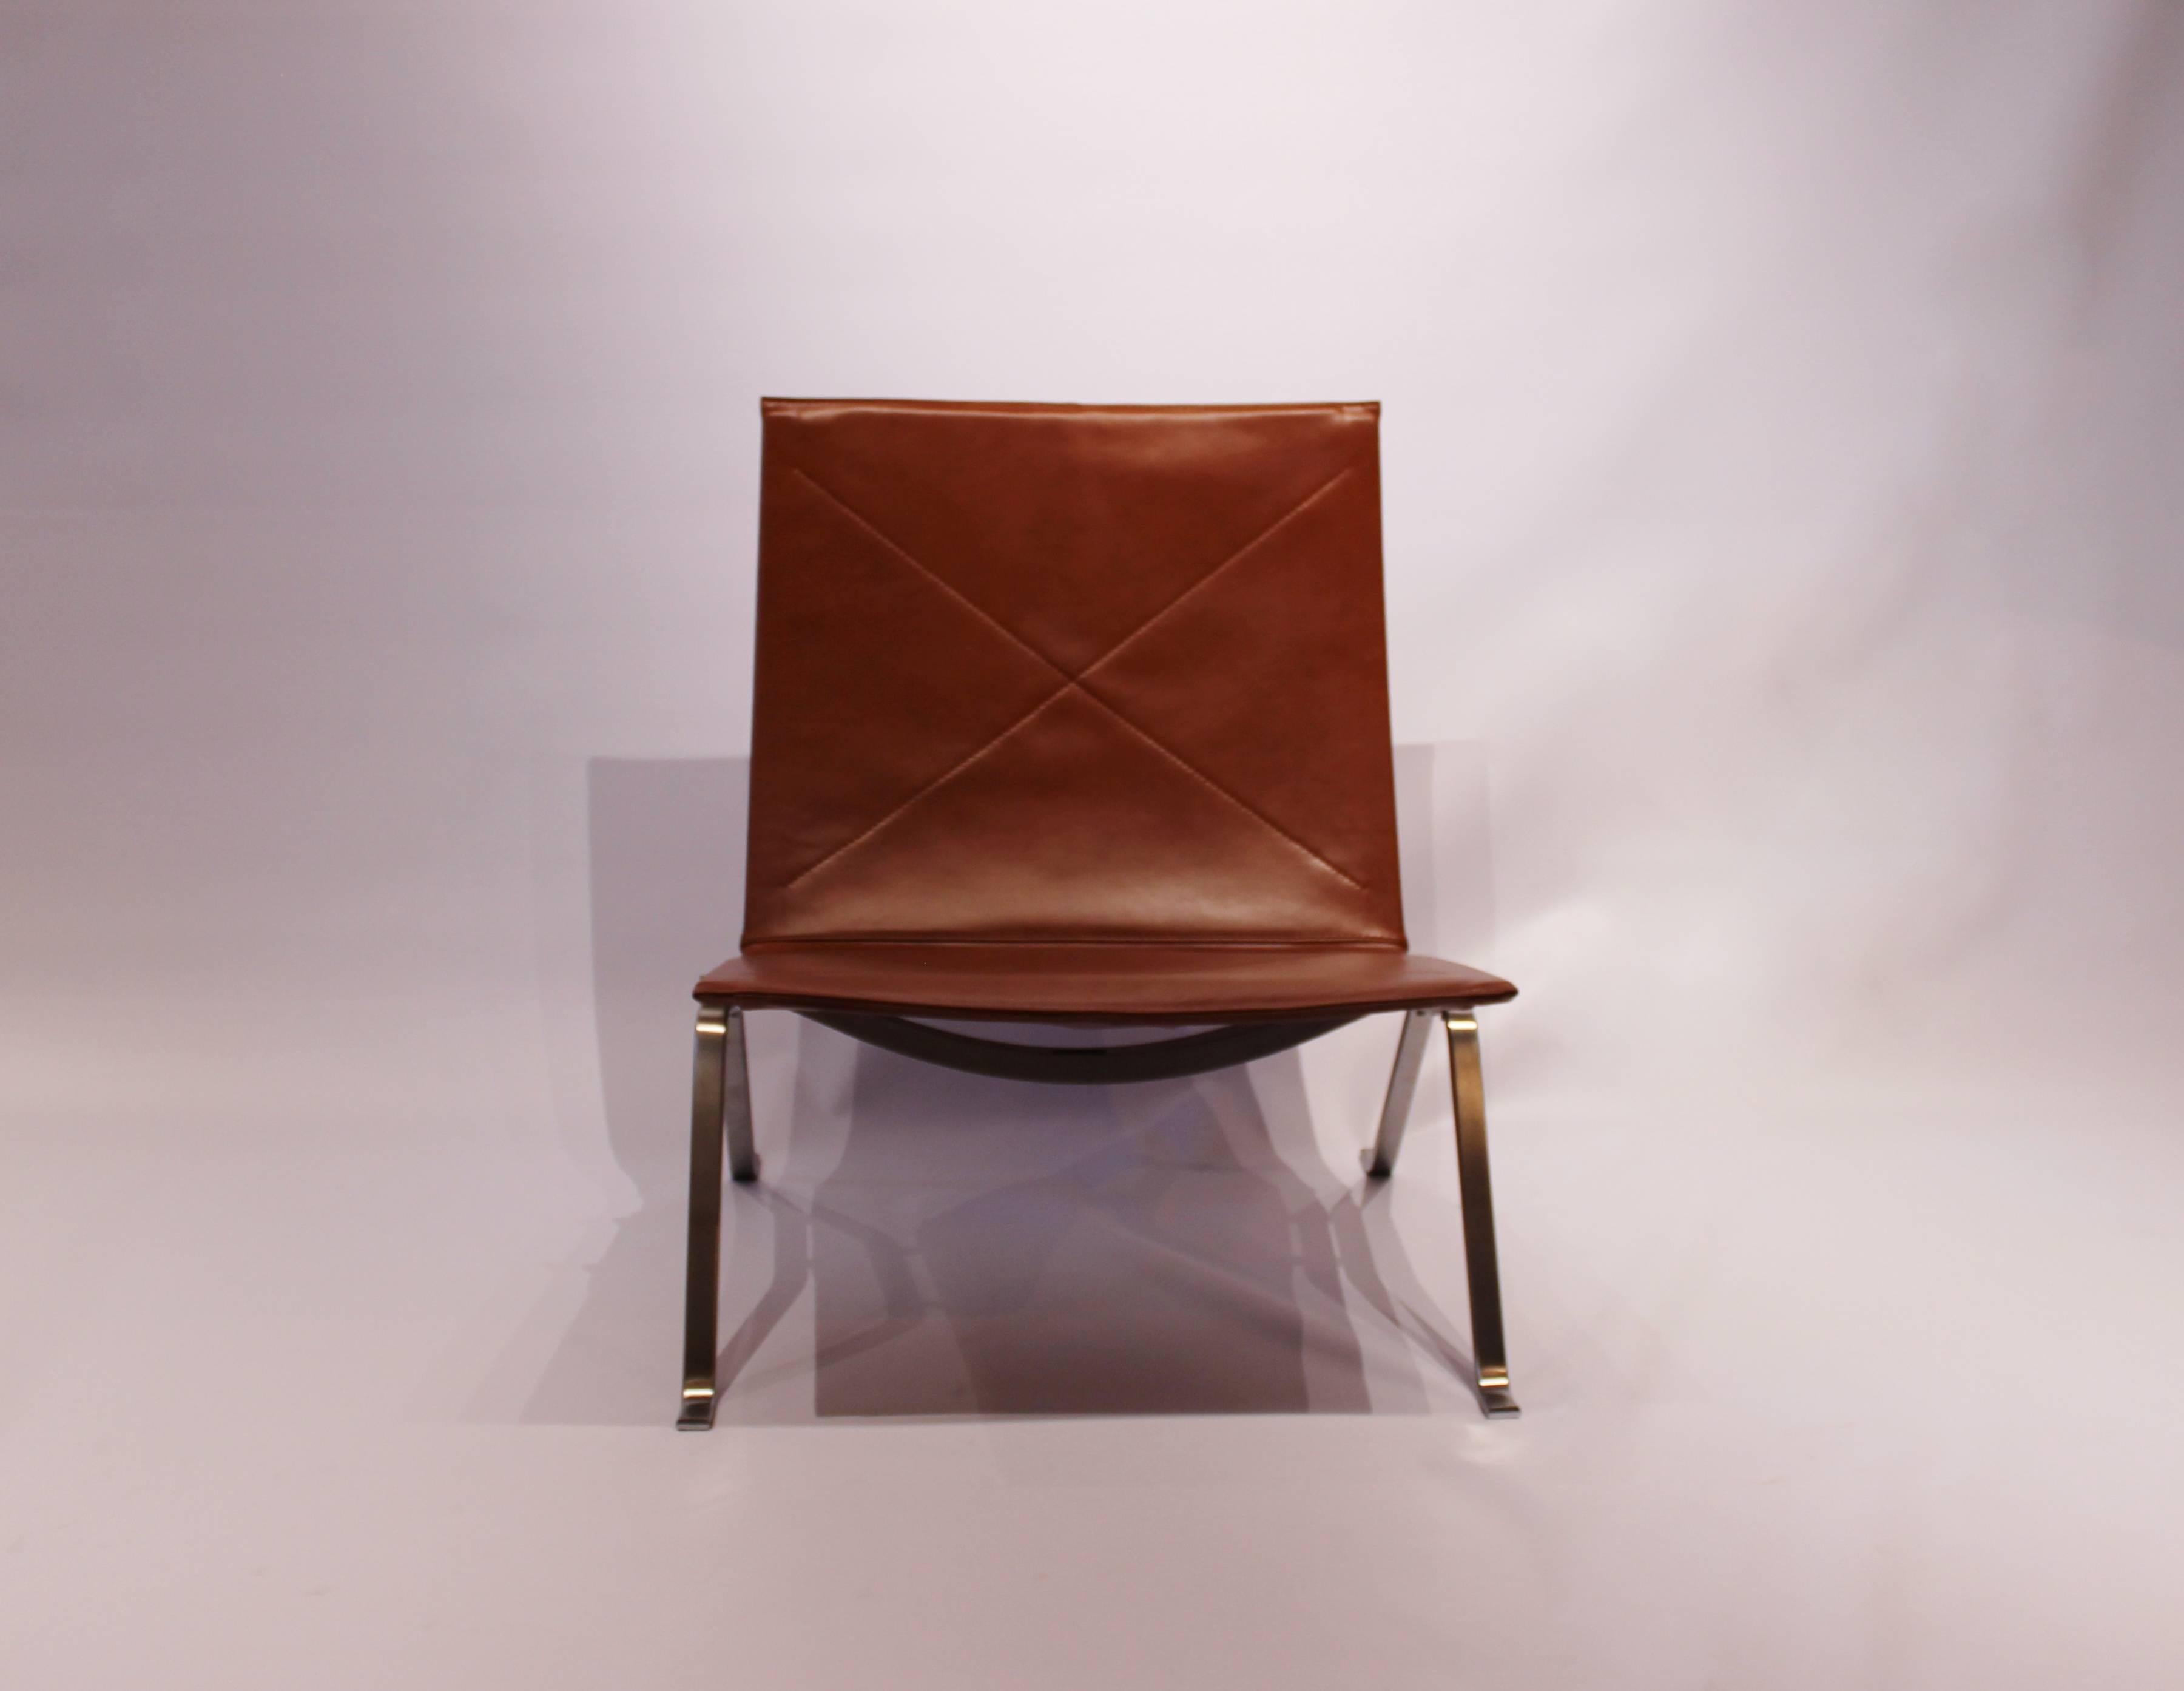 Easy chair, model PK22, designed by Poul Kjærholm and manufactured by Fritz Hansen in 2016. The chair is with cognac colored Classic leather and frame of chrome.